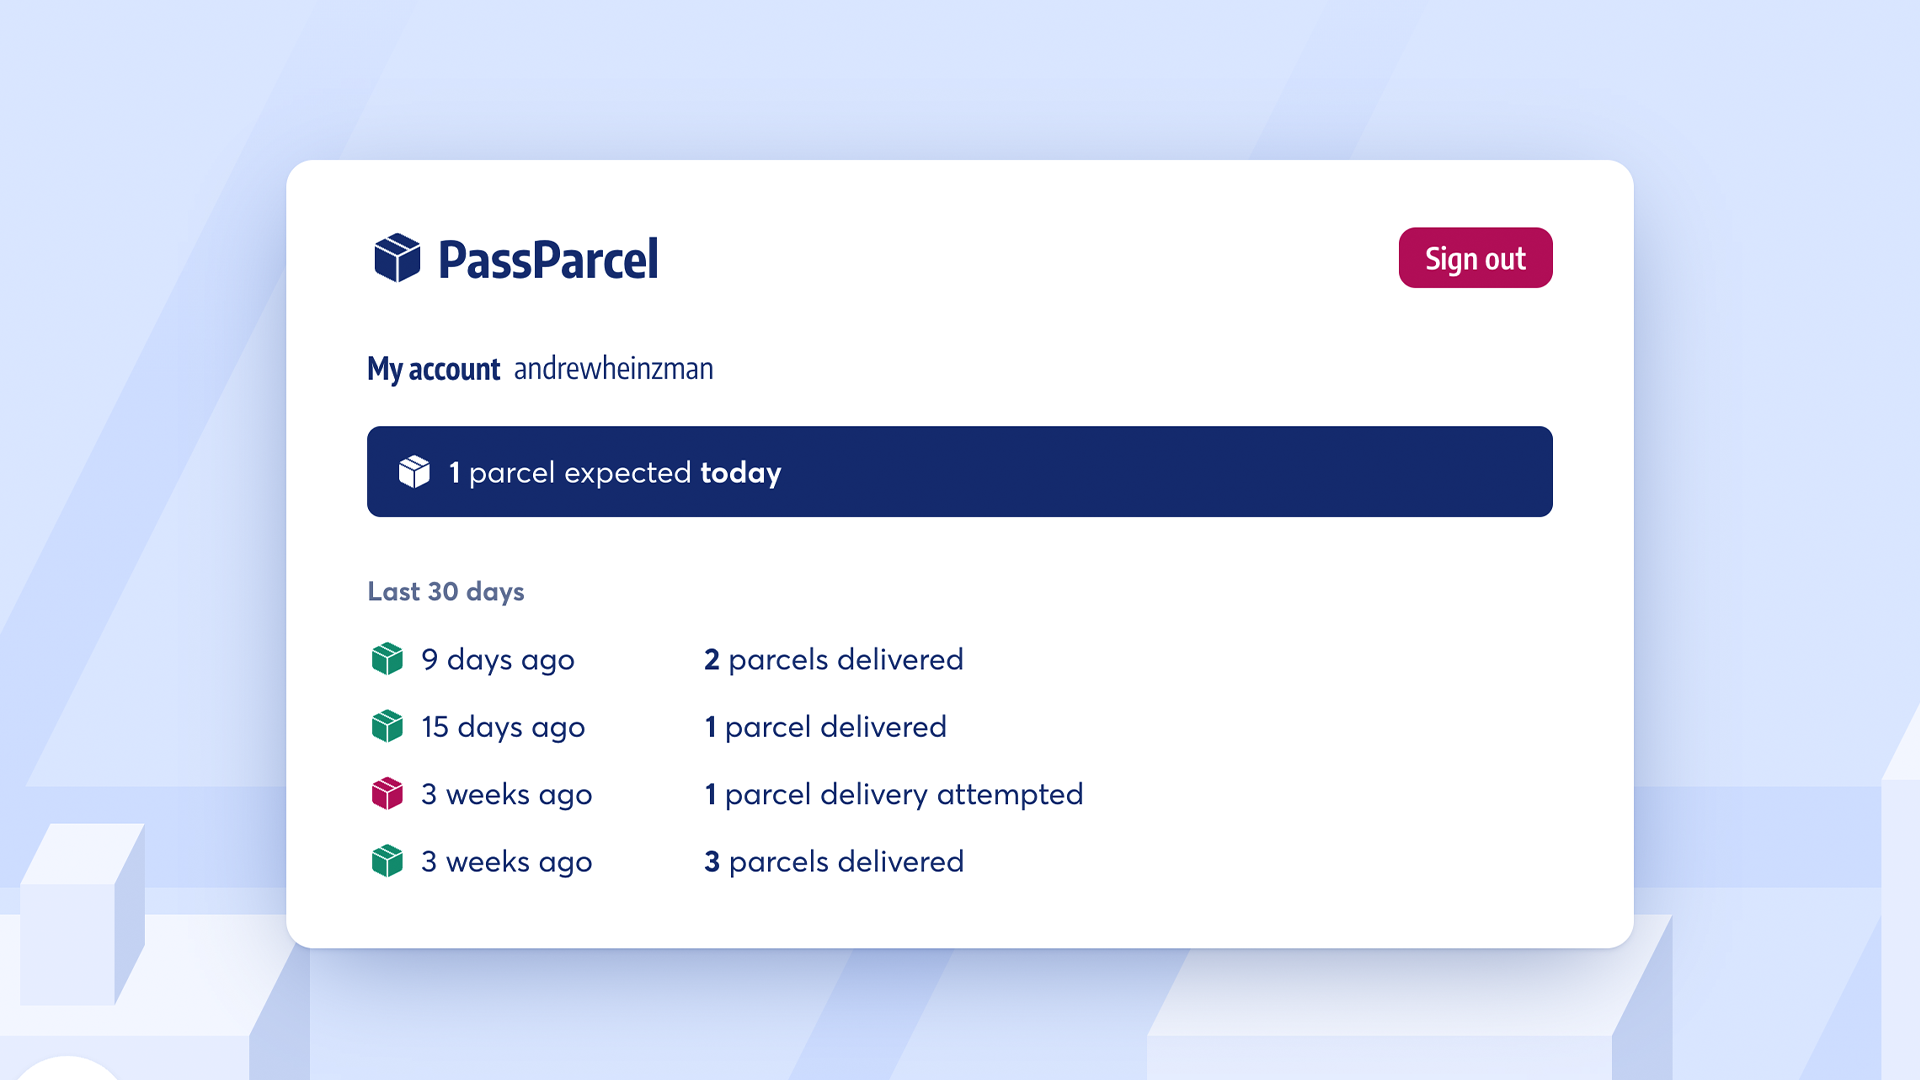 The PassParcel demo shows my "incoming packages" after logging in with passkeys.